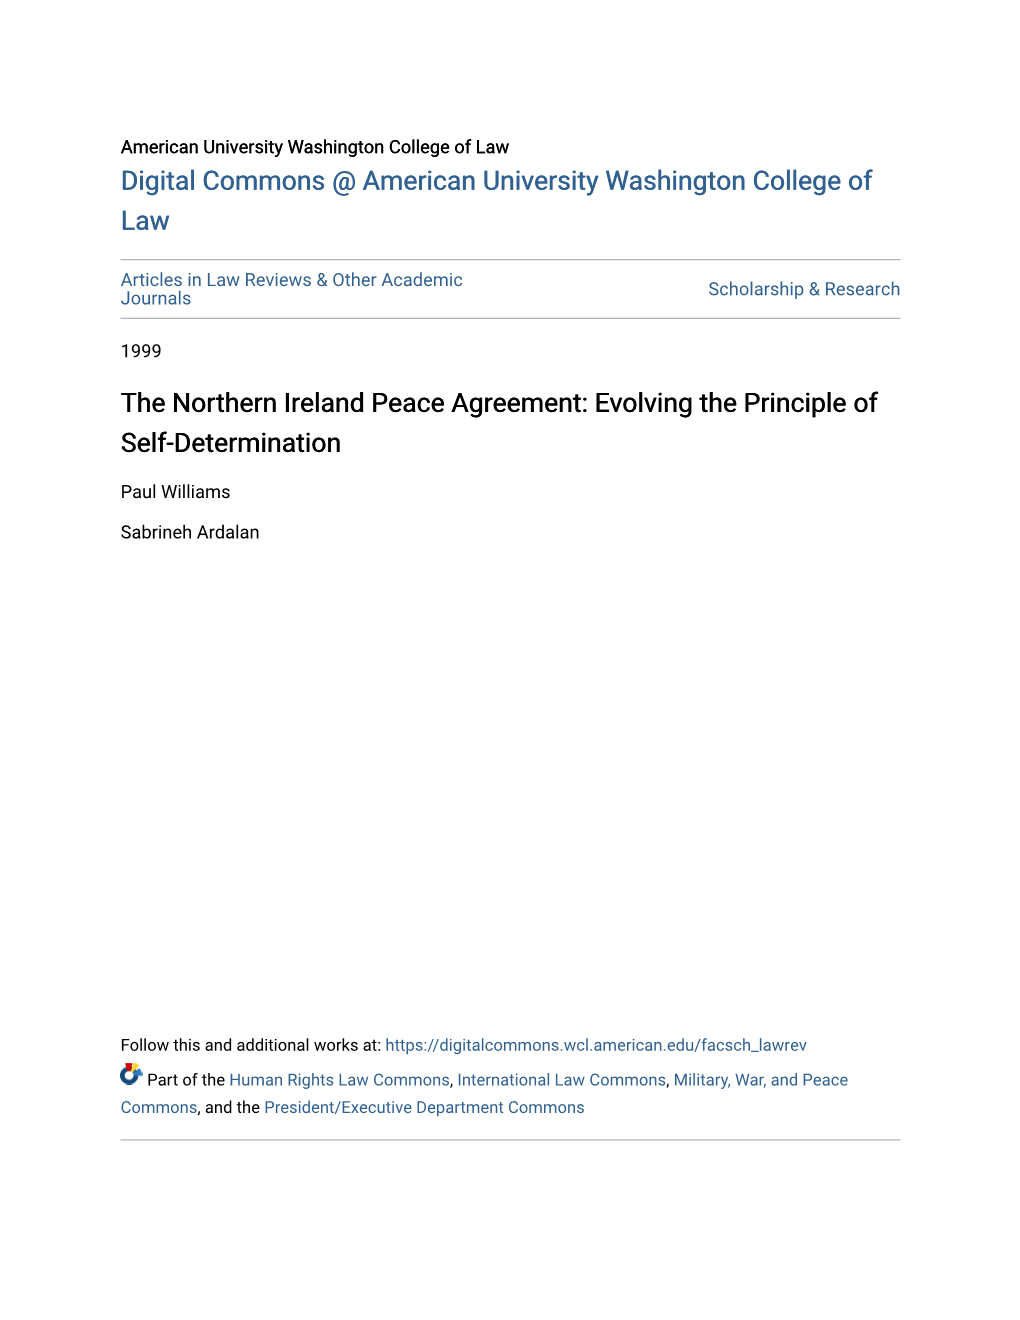 The Northern Ireland Peace Agreement: Evolving the Principle of Self-Determination